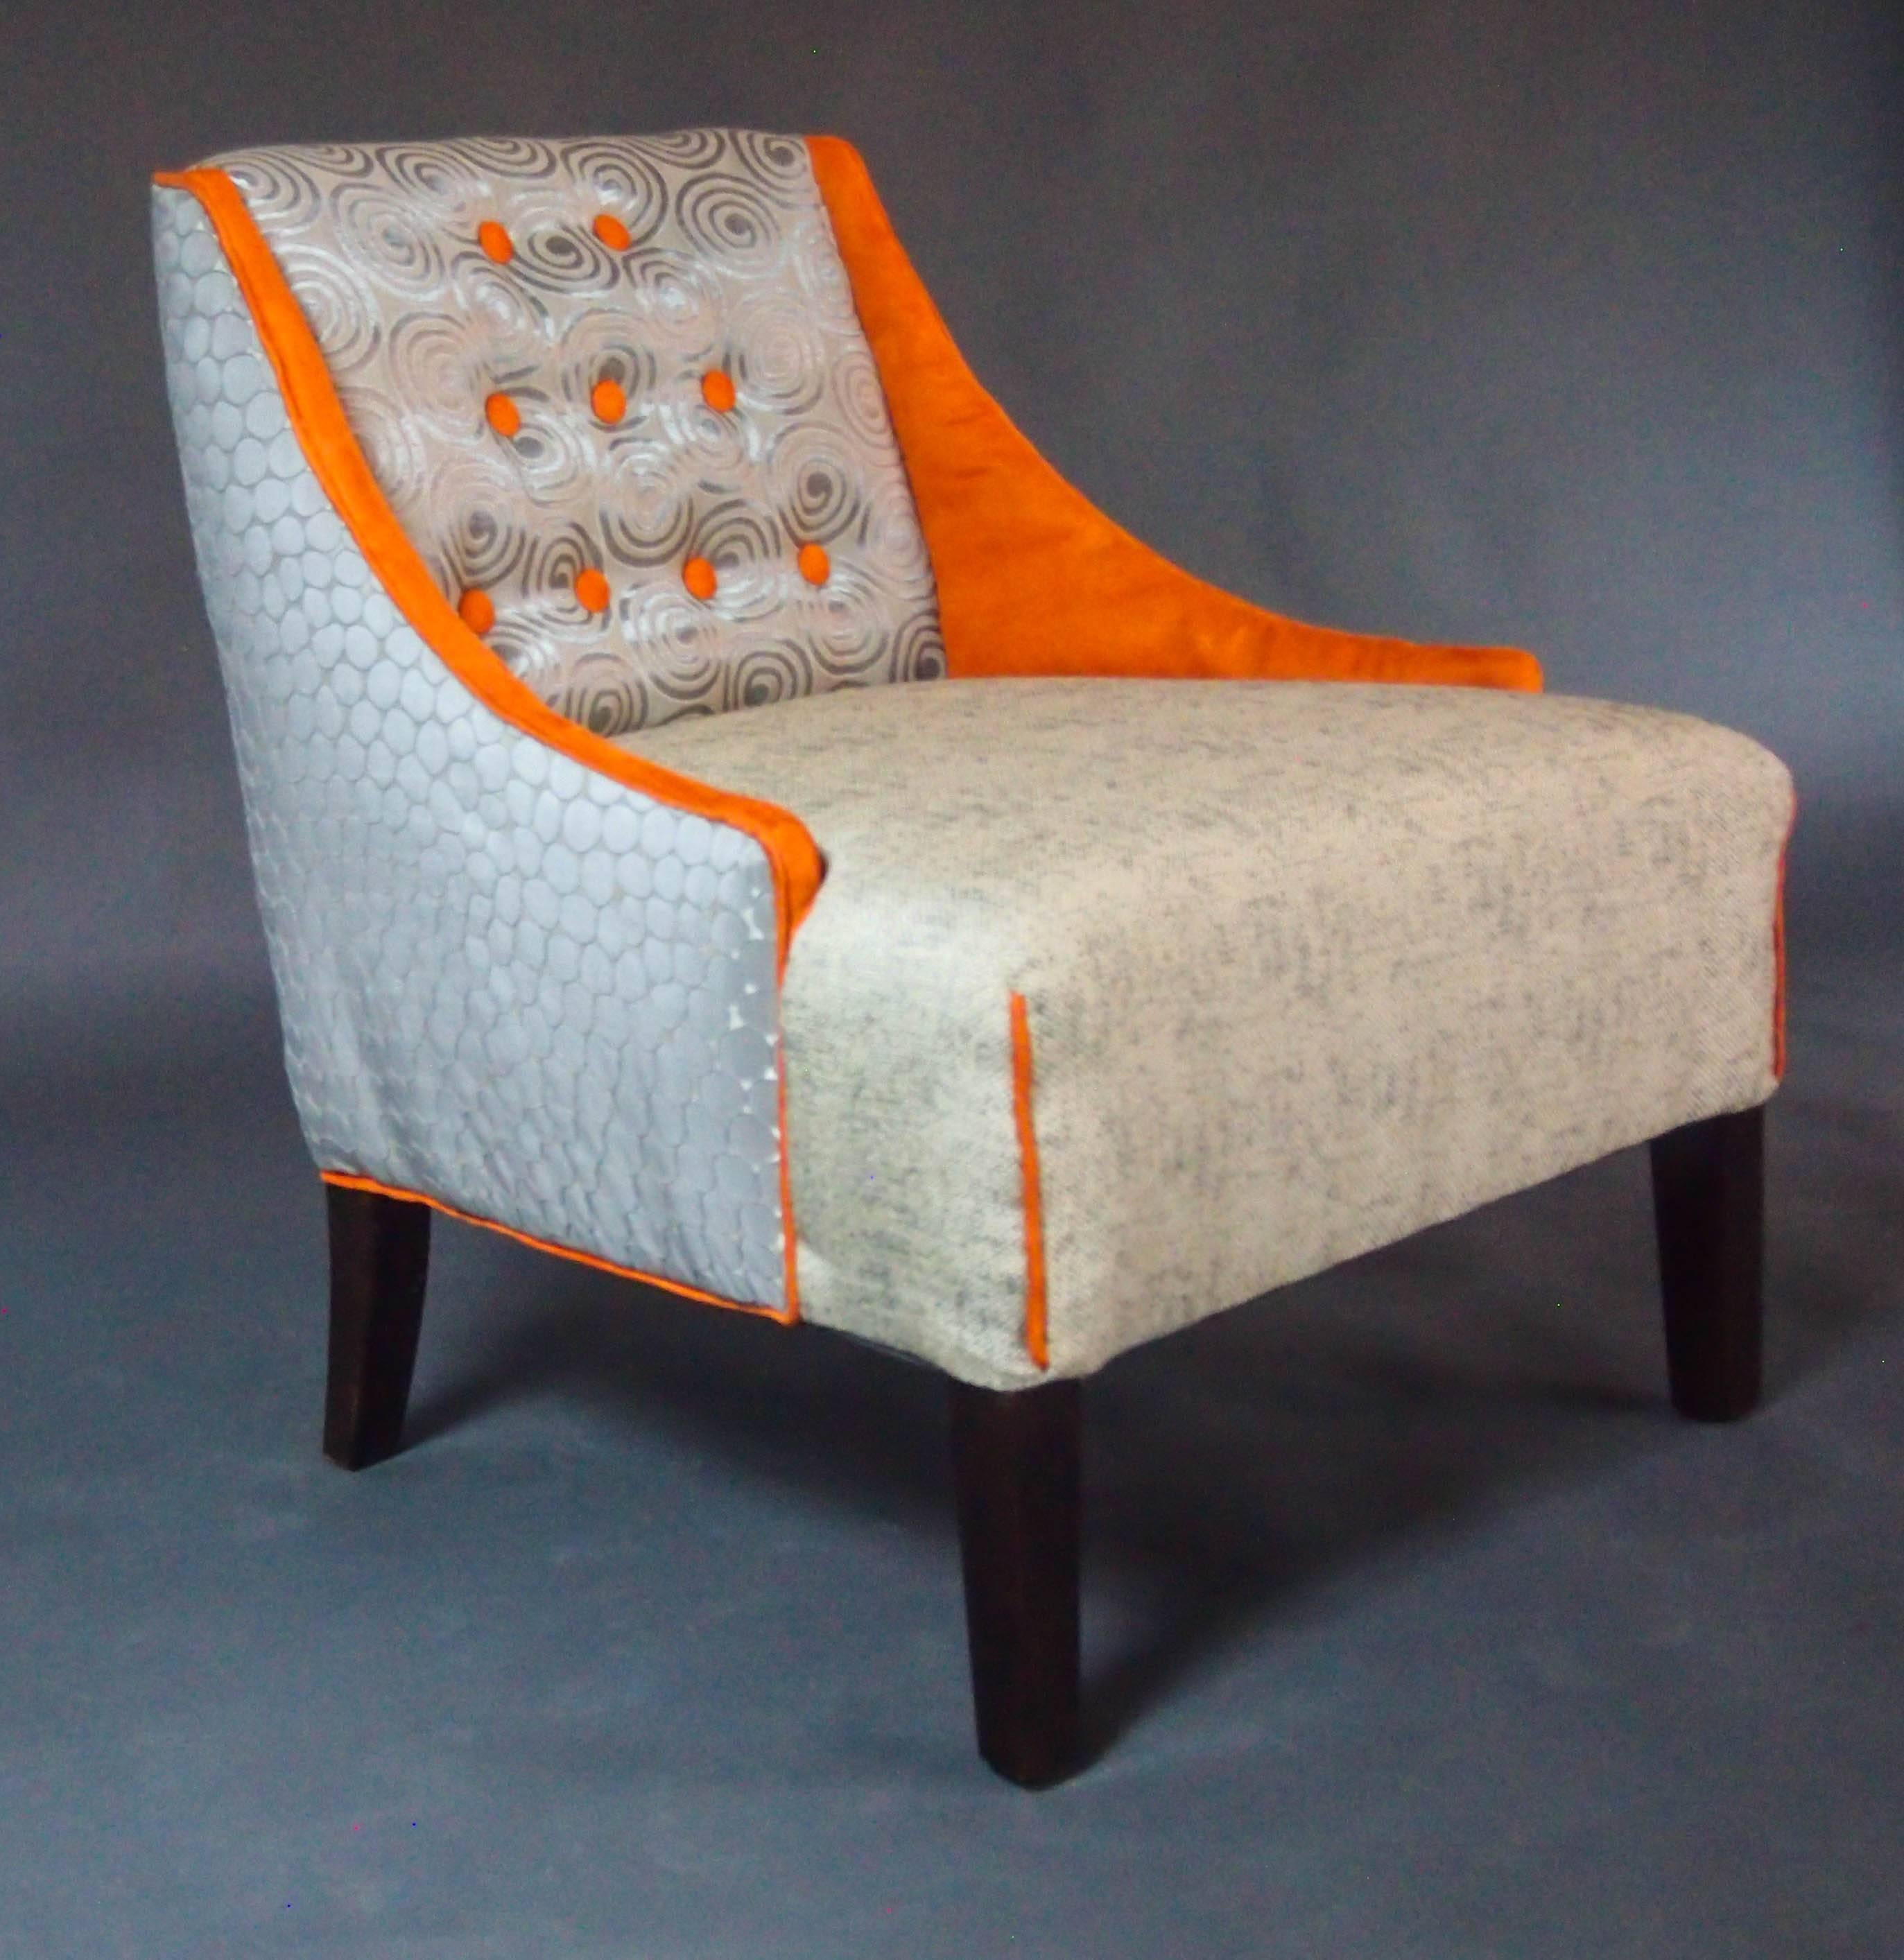 The Hollywood Regency style brought color and glamour to interior design. Now it can do the same for your living room. Sit back on luminous gray swirls, bright orange ultra suede armrests and a plush seat.

Like all of our pieces, this chair was